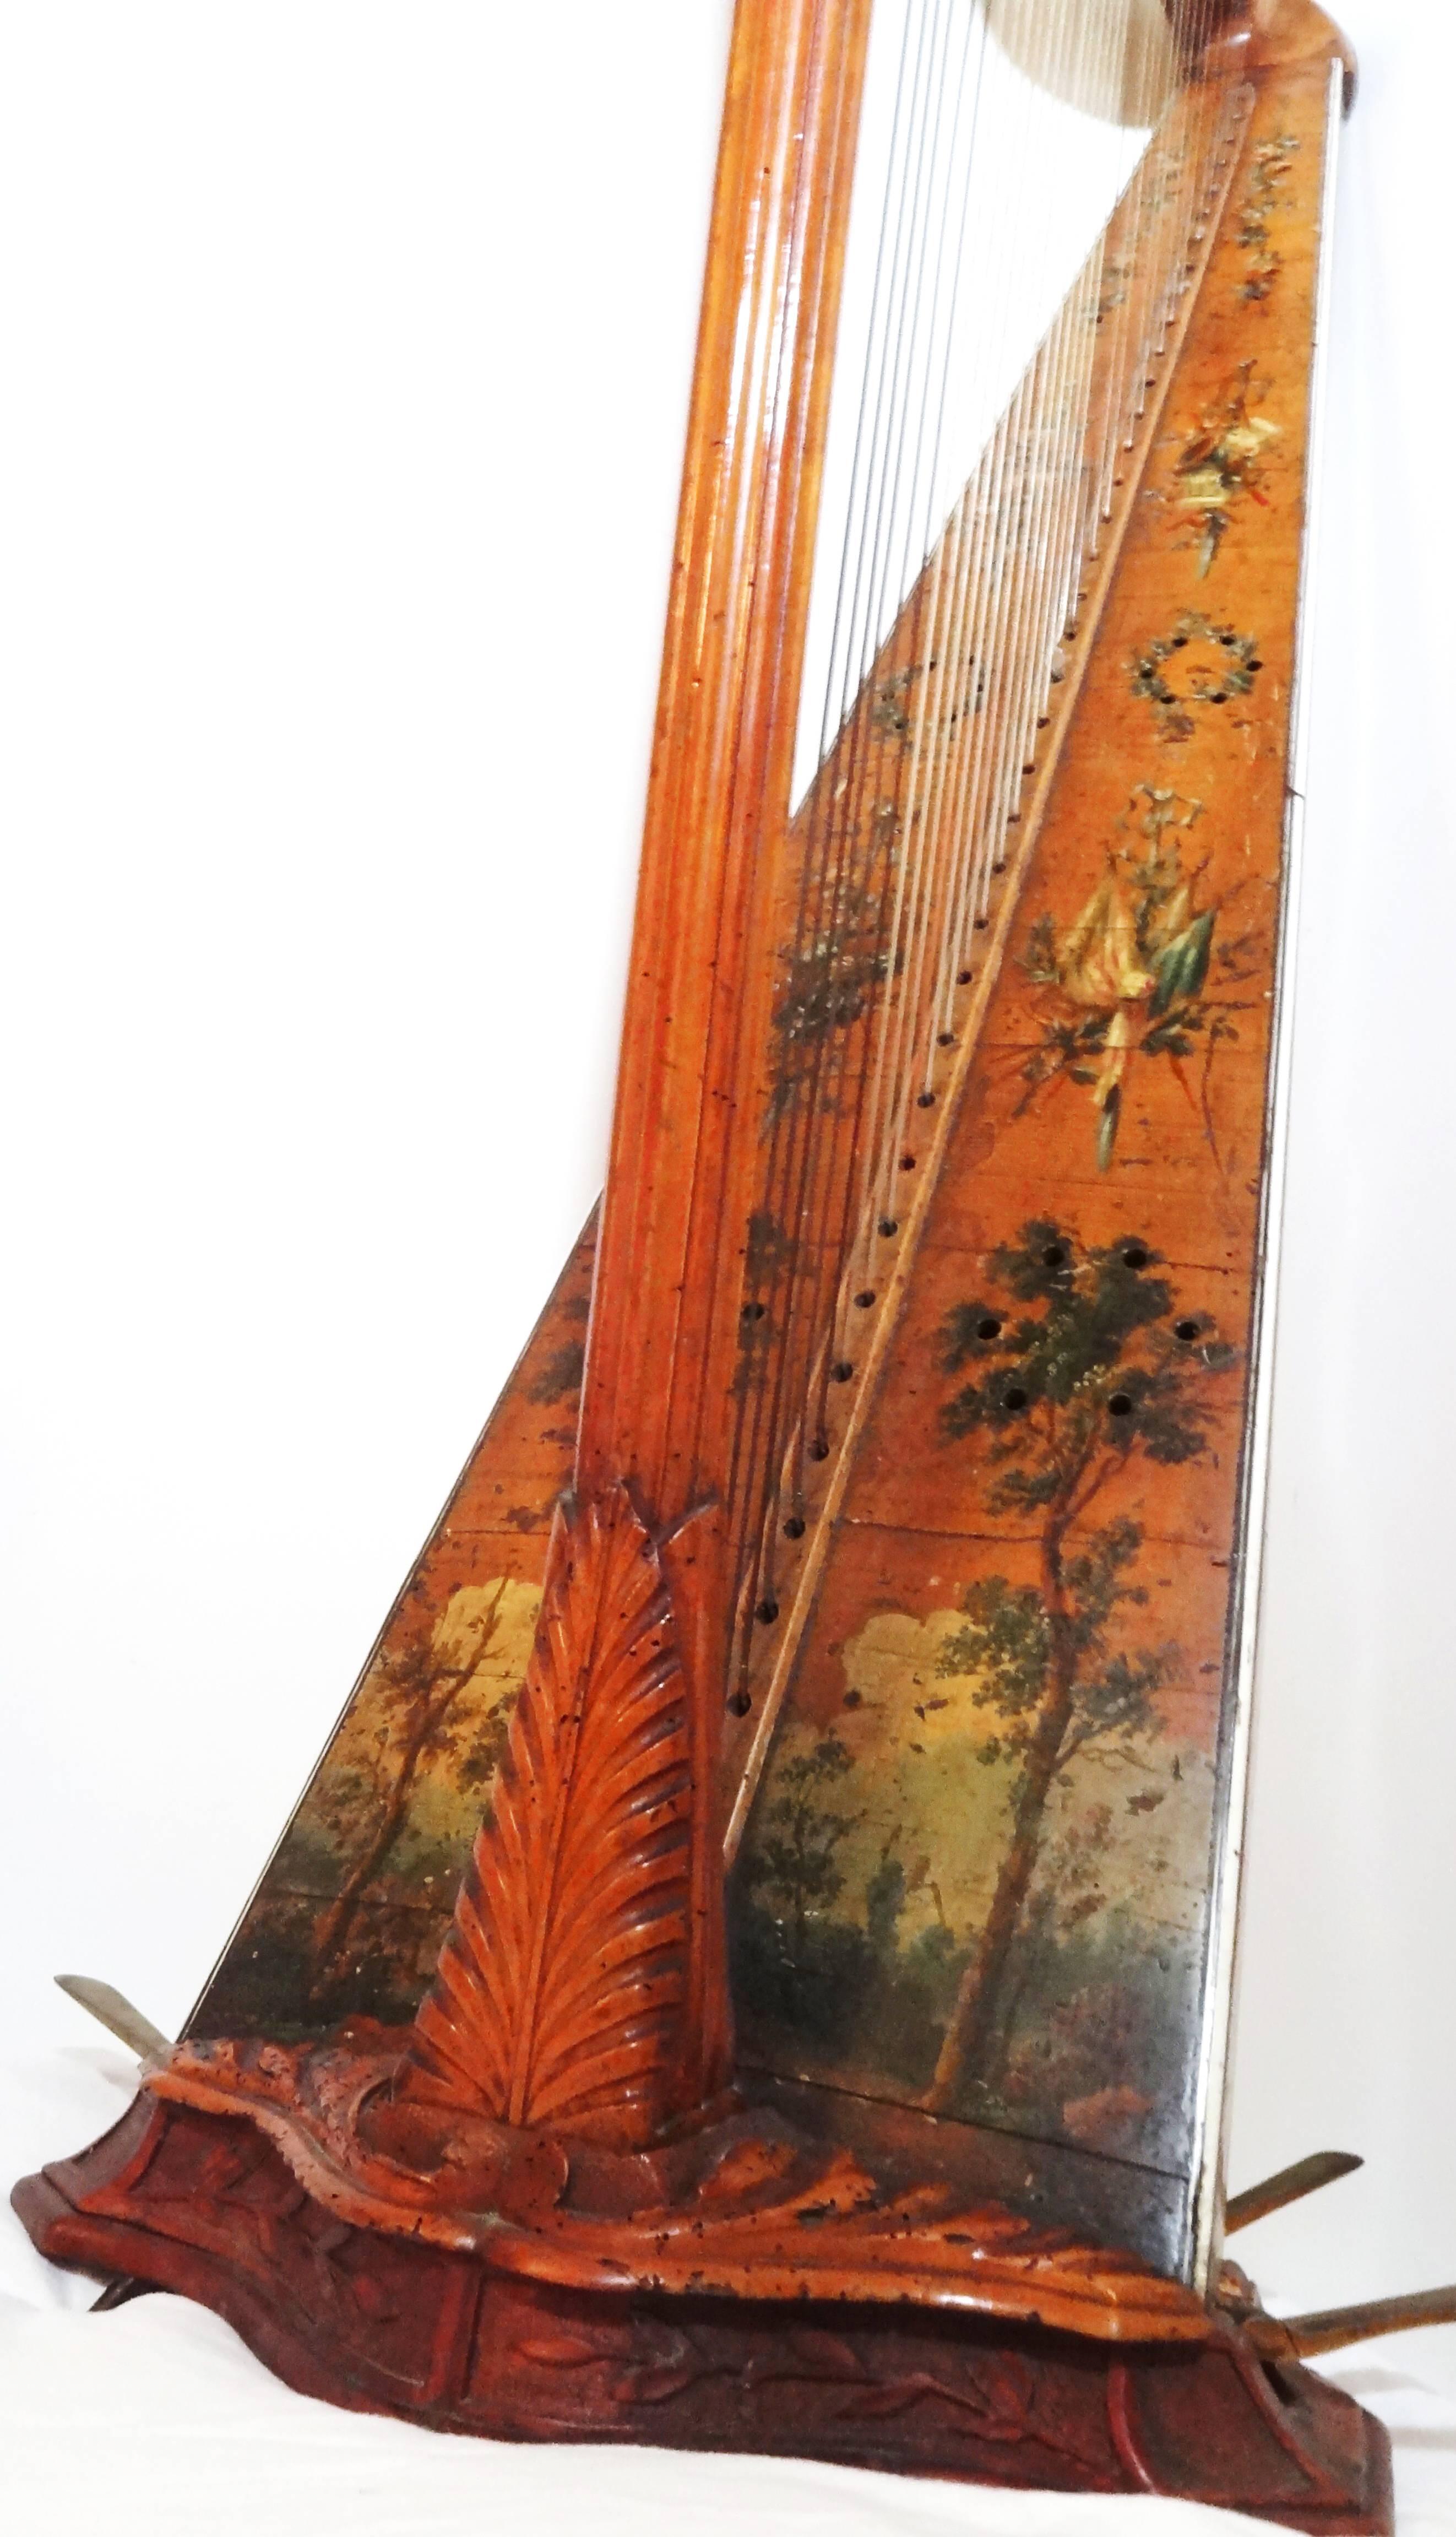 Baroque Rare Harp, 18th Century, Wood Painted with Flowers, Landscape, France